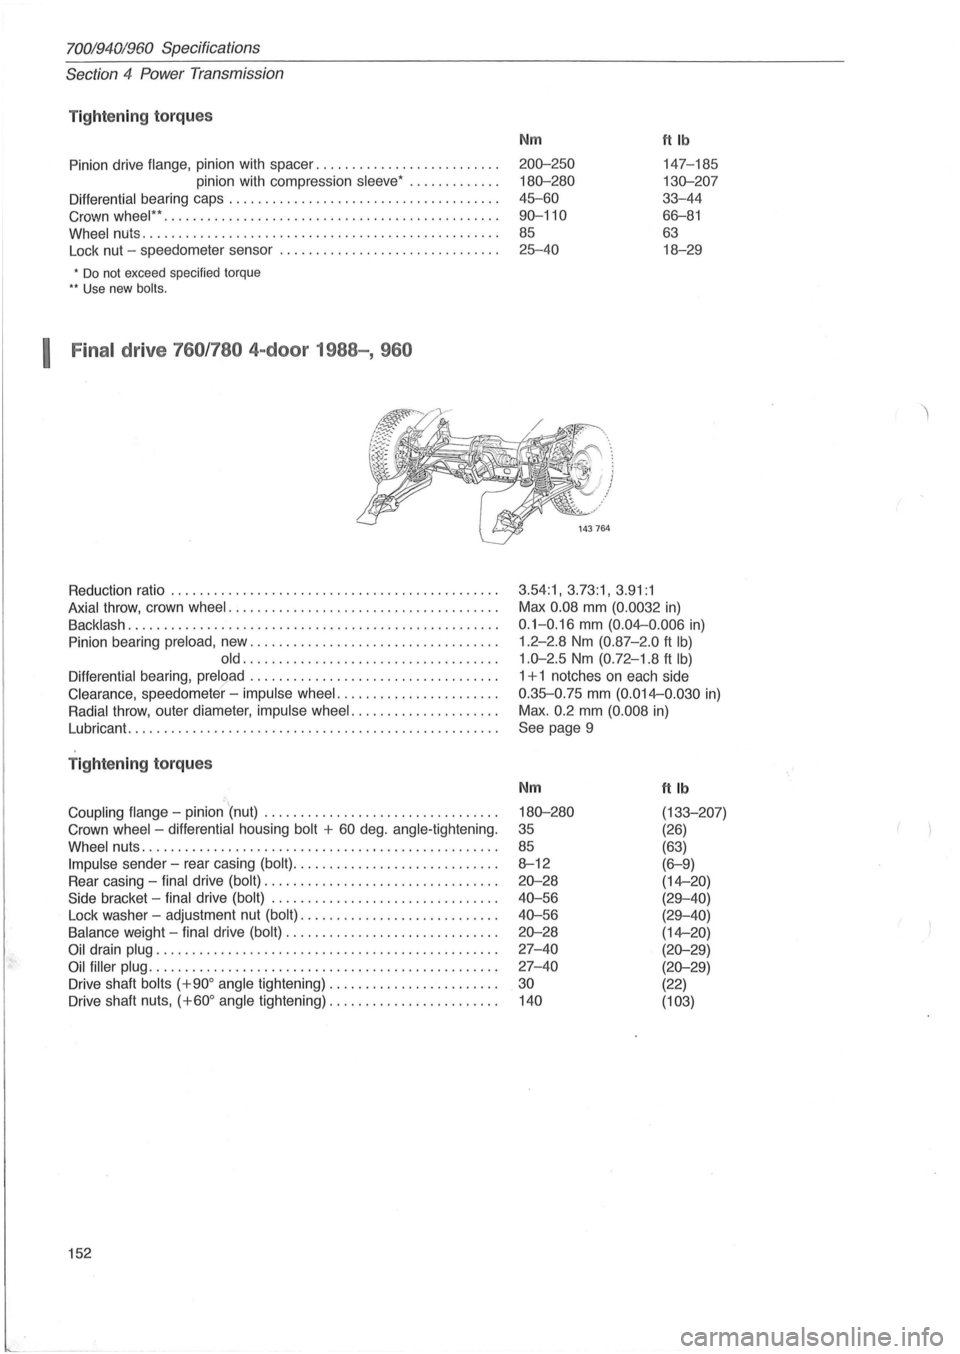 VOLVO 940 1982  Service Repair Manual 70019401960 Specifications 
Section 
4 Power  Transmission 
Tightening  torqu es 
Pinion  drive flange, pinion  with spacer .......... ........ ....... . 
pinion  with compression 
sleeve  ..........